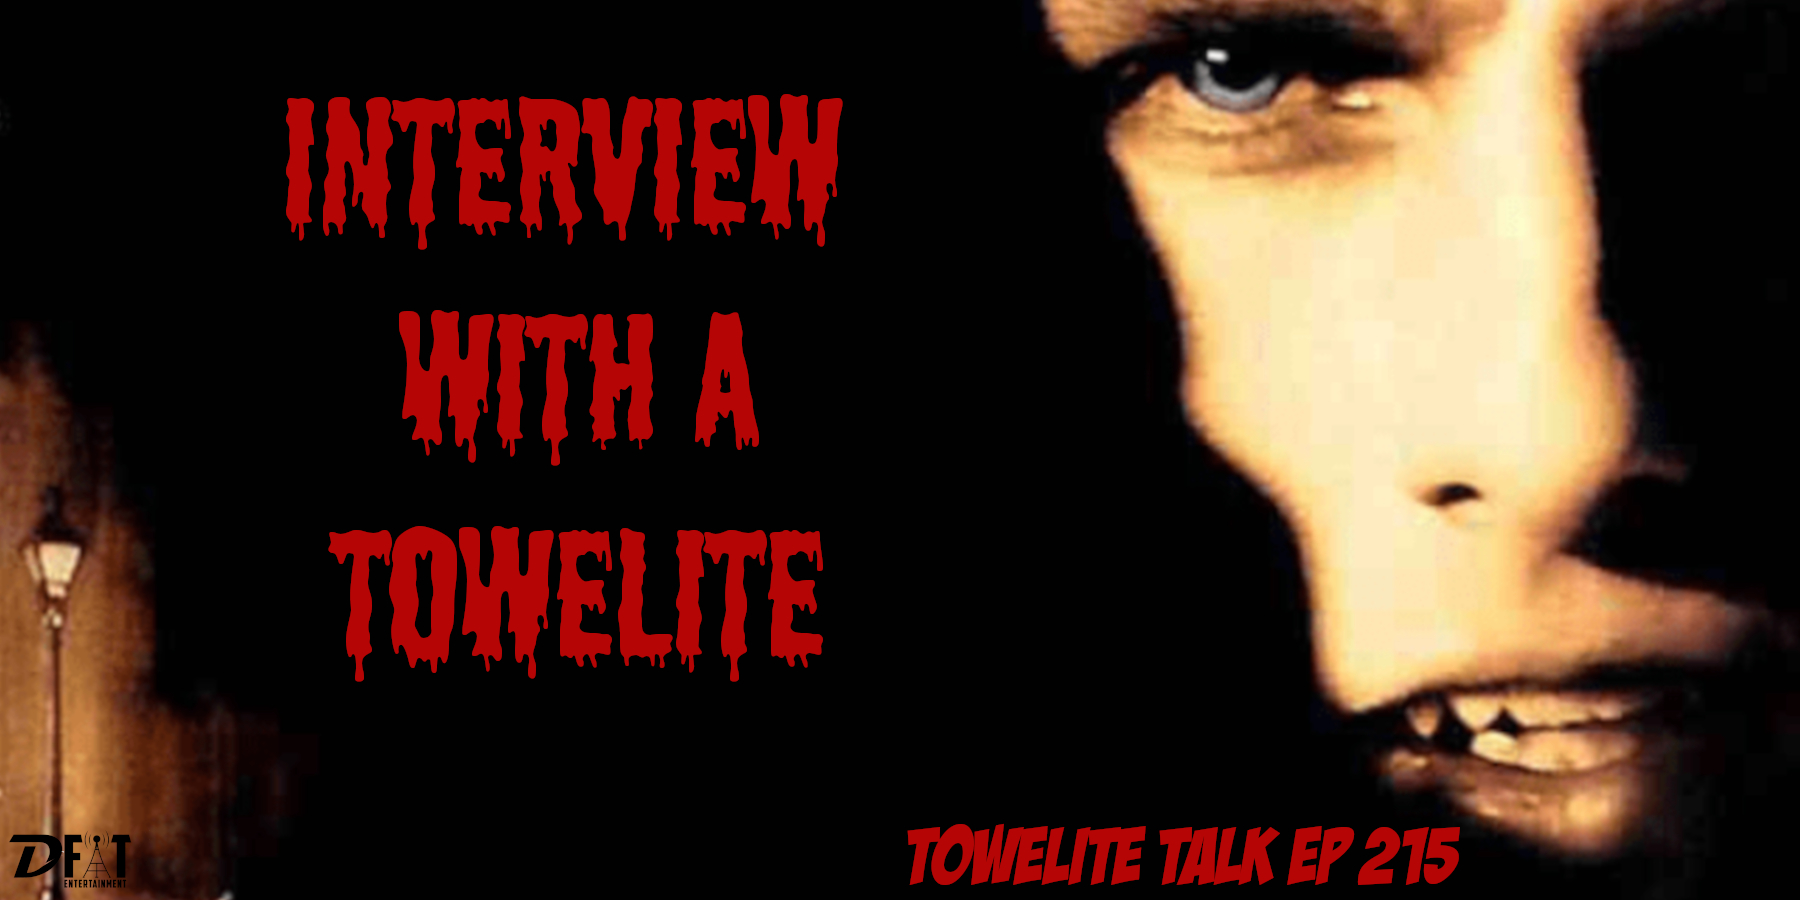 215 - Interview with a Towelite